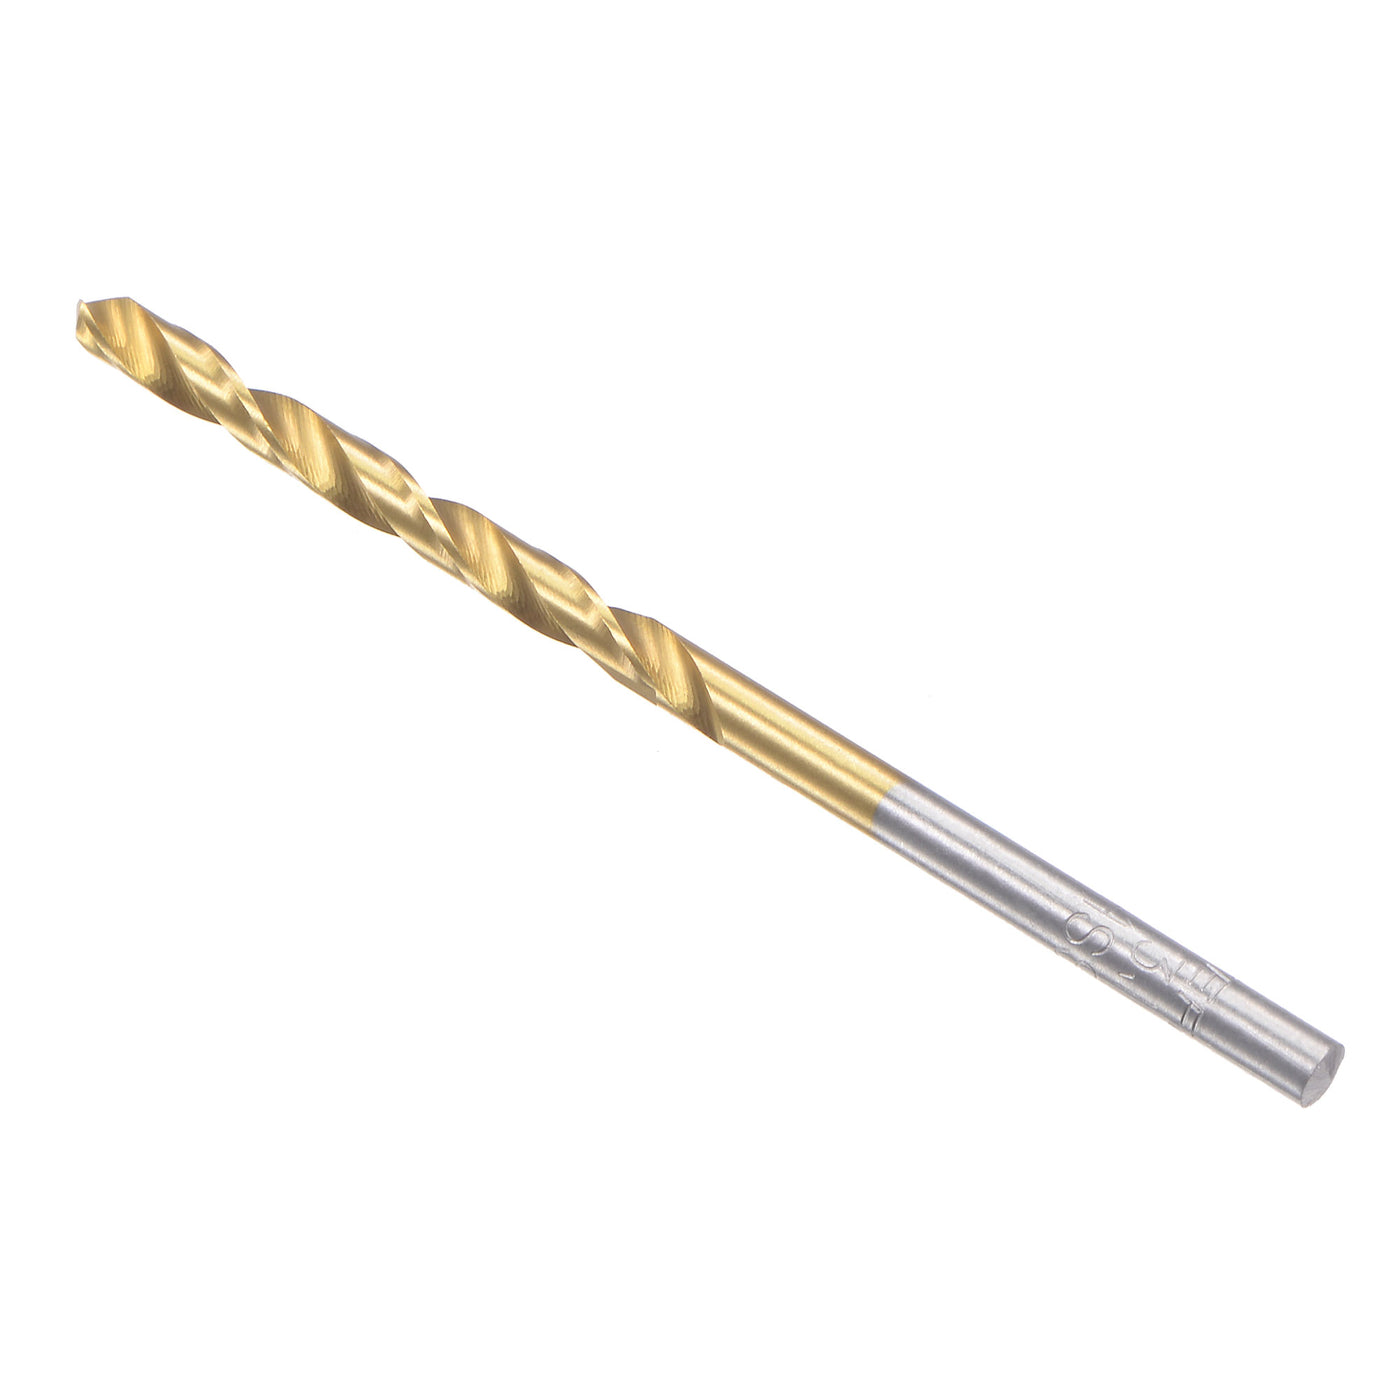 uxcell Uxcell High Speed Steel Twist Drill Bit 3.1mm Fully Ground Titanium Coated 2 Pcs